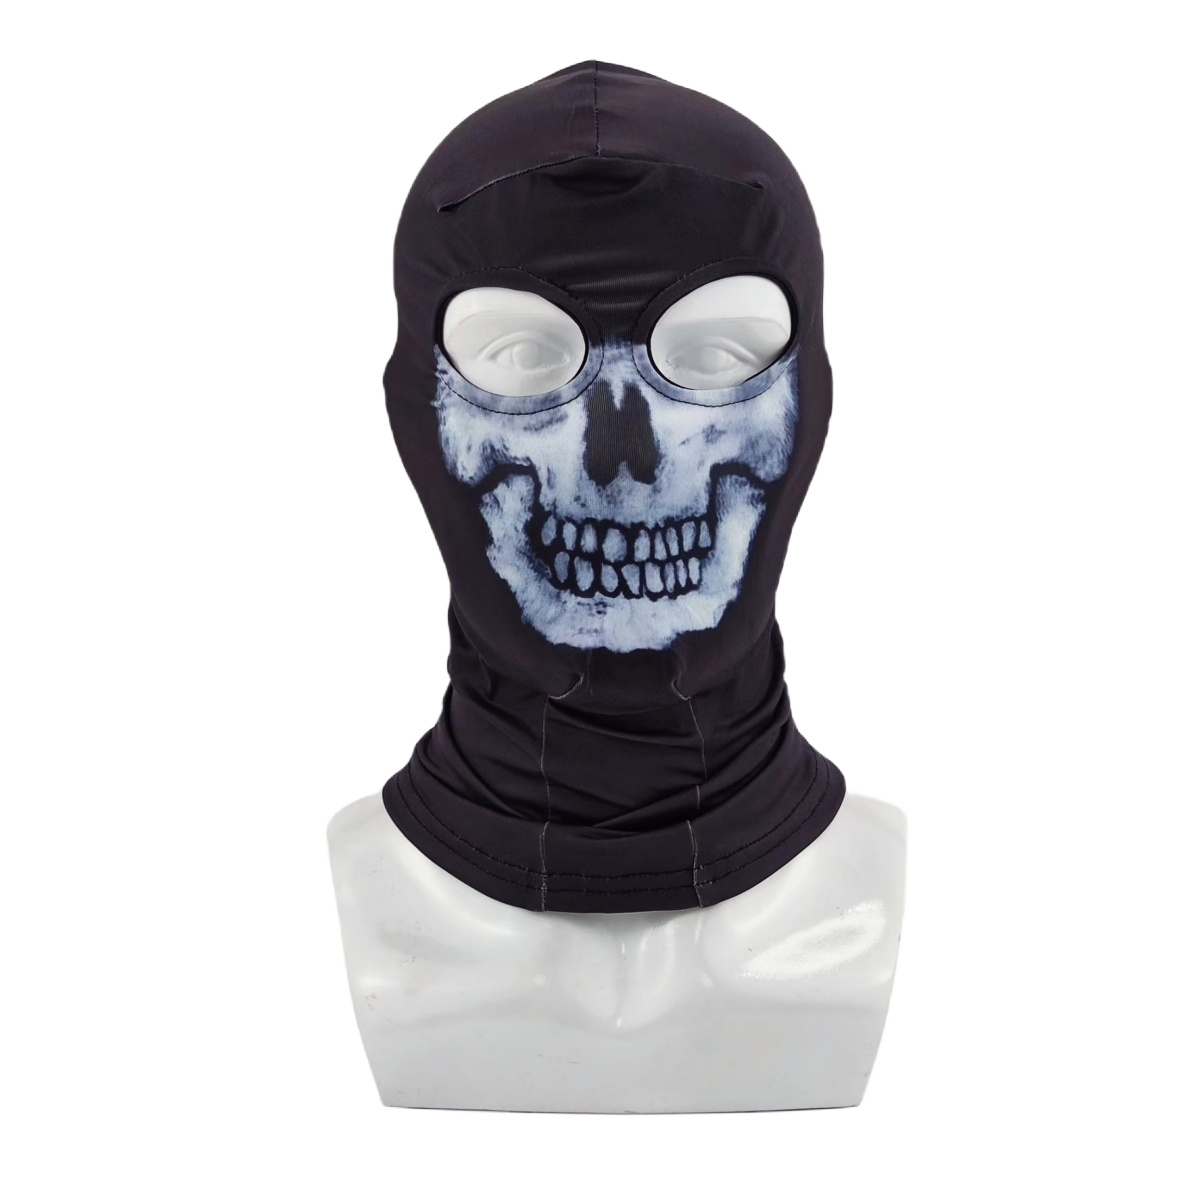 Call Of Duty Ghost Mask pour adulte Balaclava Hat Skull Face Mask